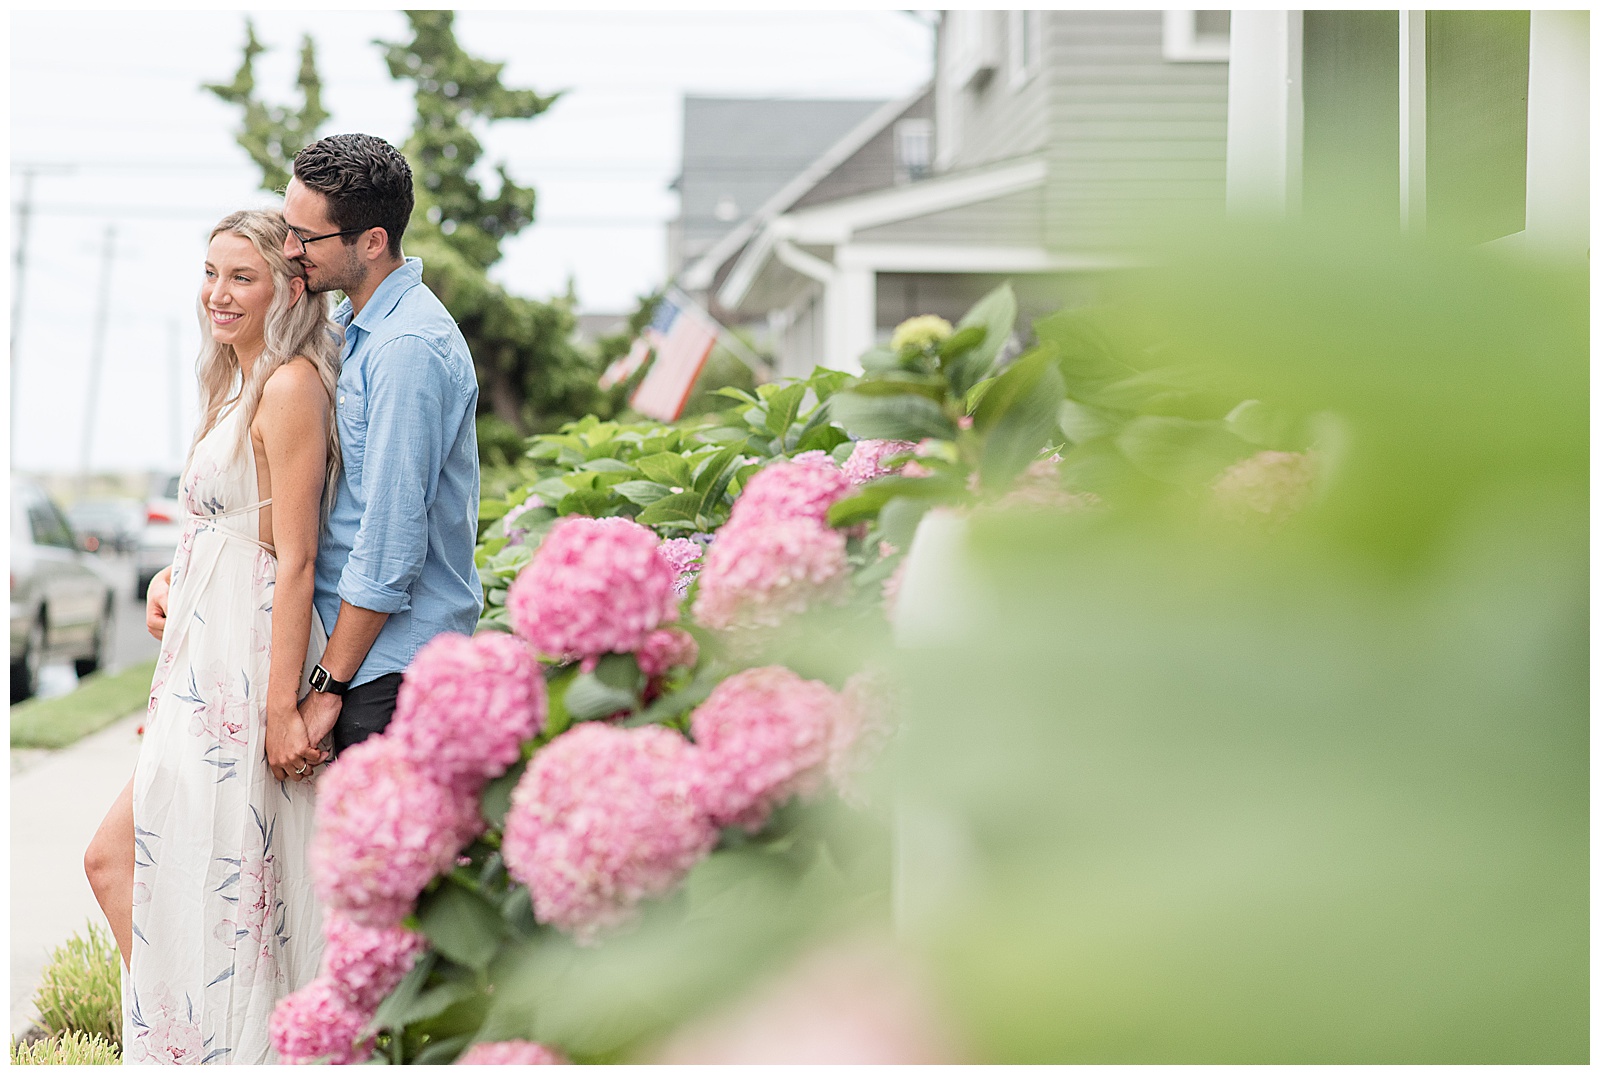 guy standing behind girl and kissing the top of her head along sidewalk with large pink hydrangea bush in beach town by homes